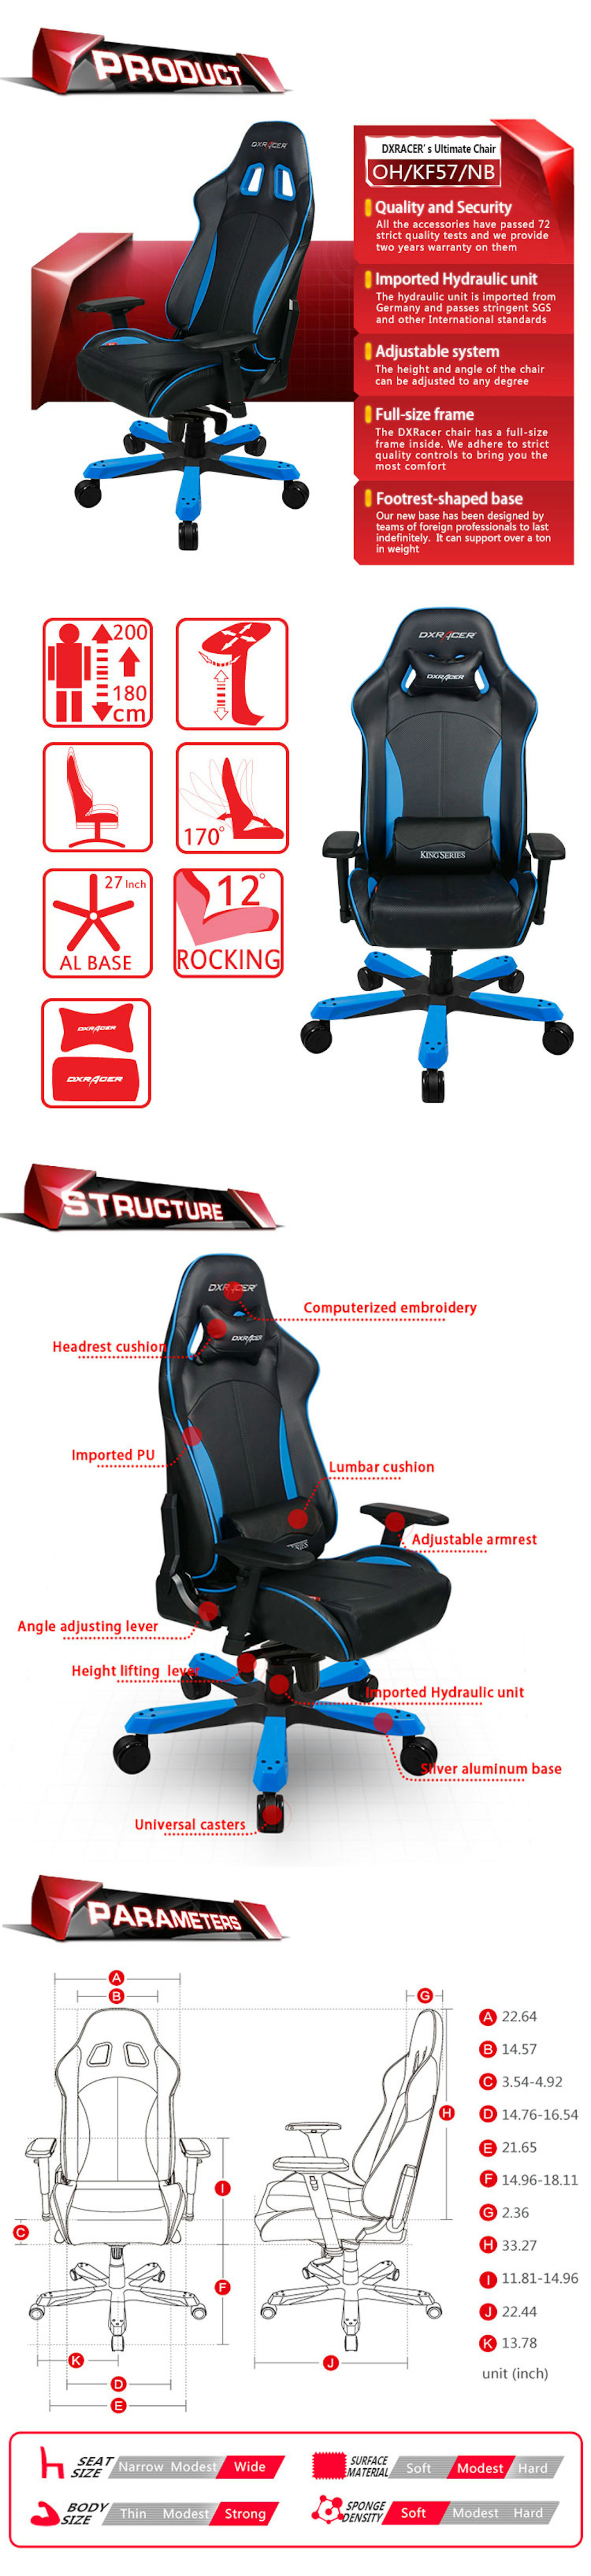 DXRacer King Series PC Gaming Chair - OH/KF57